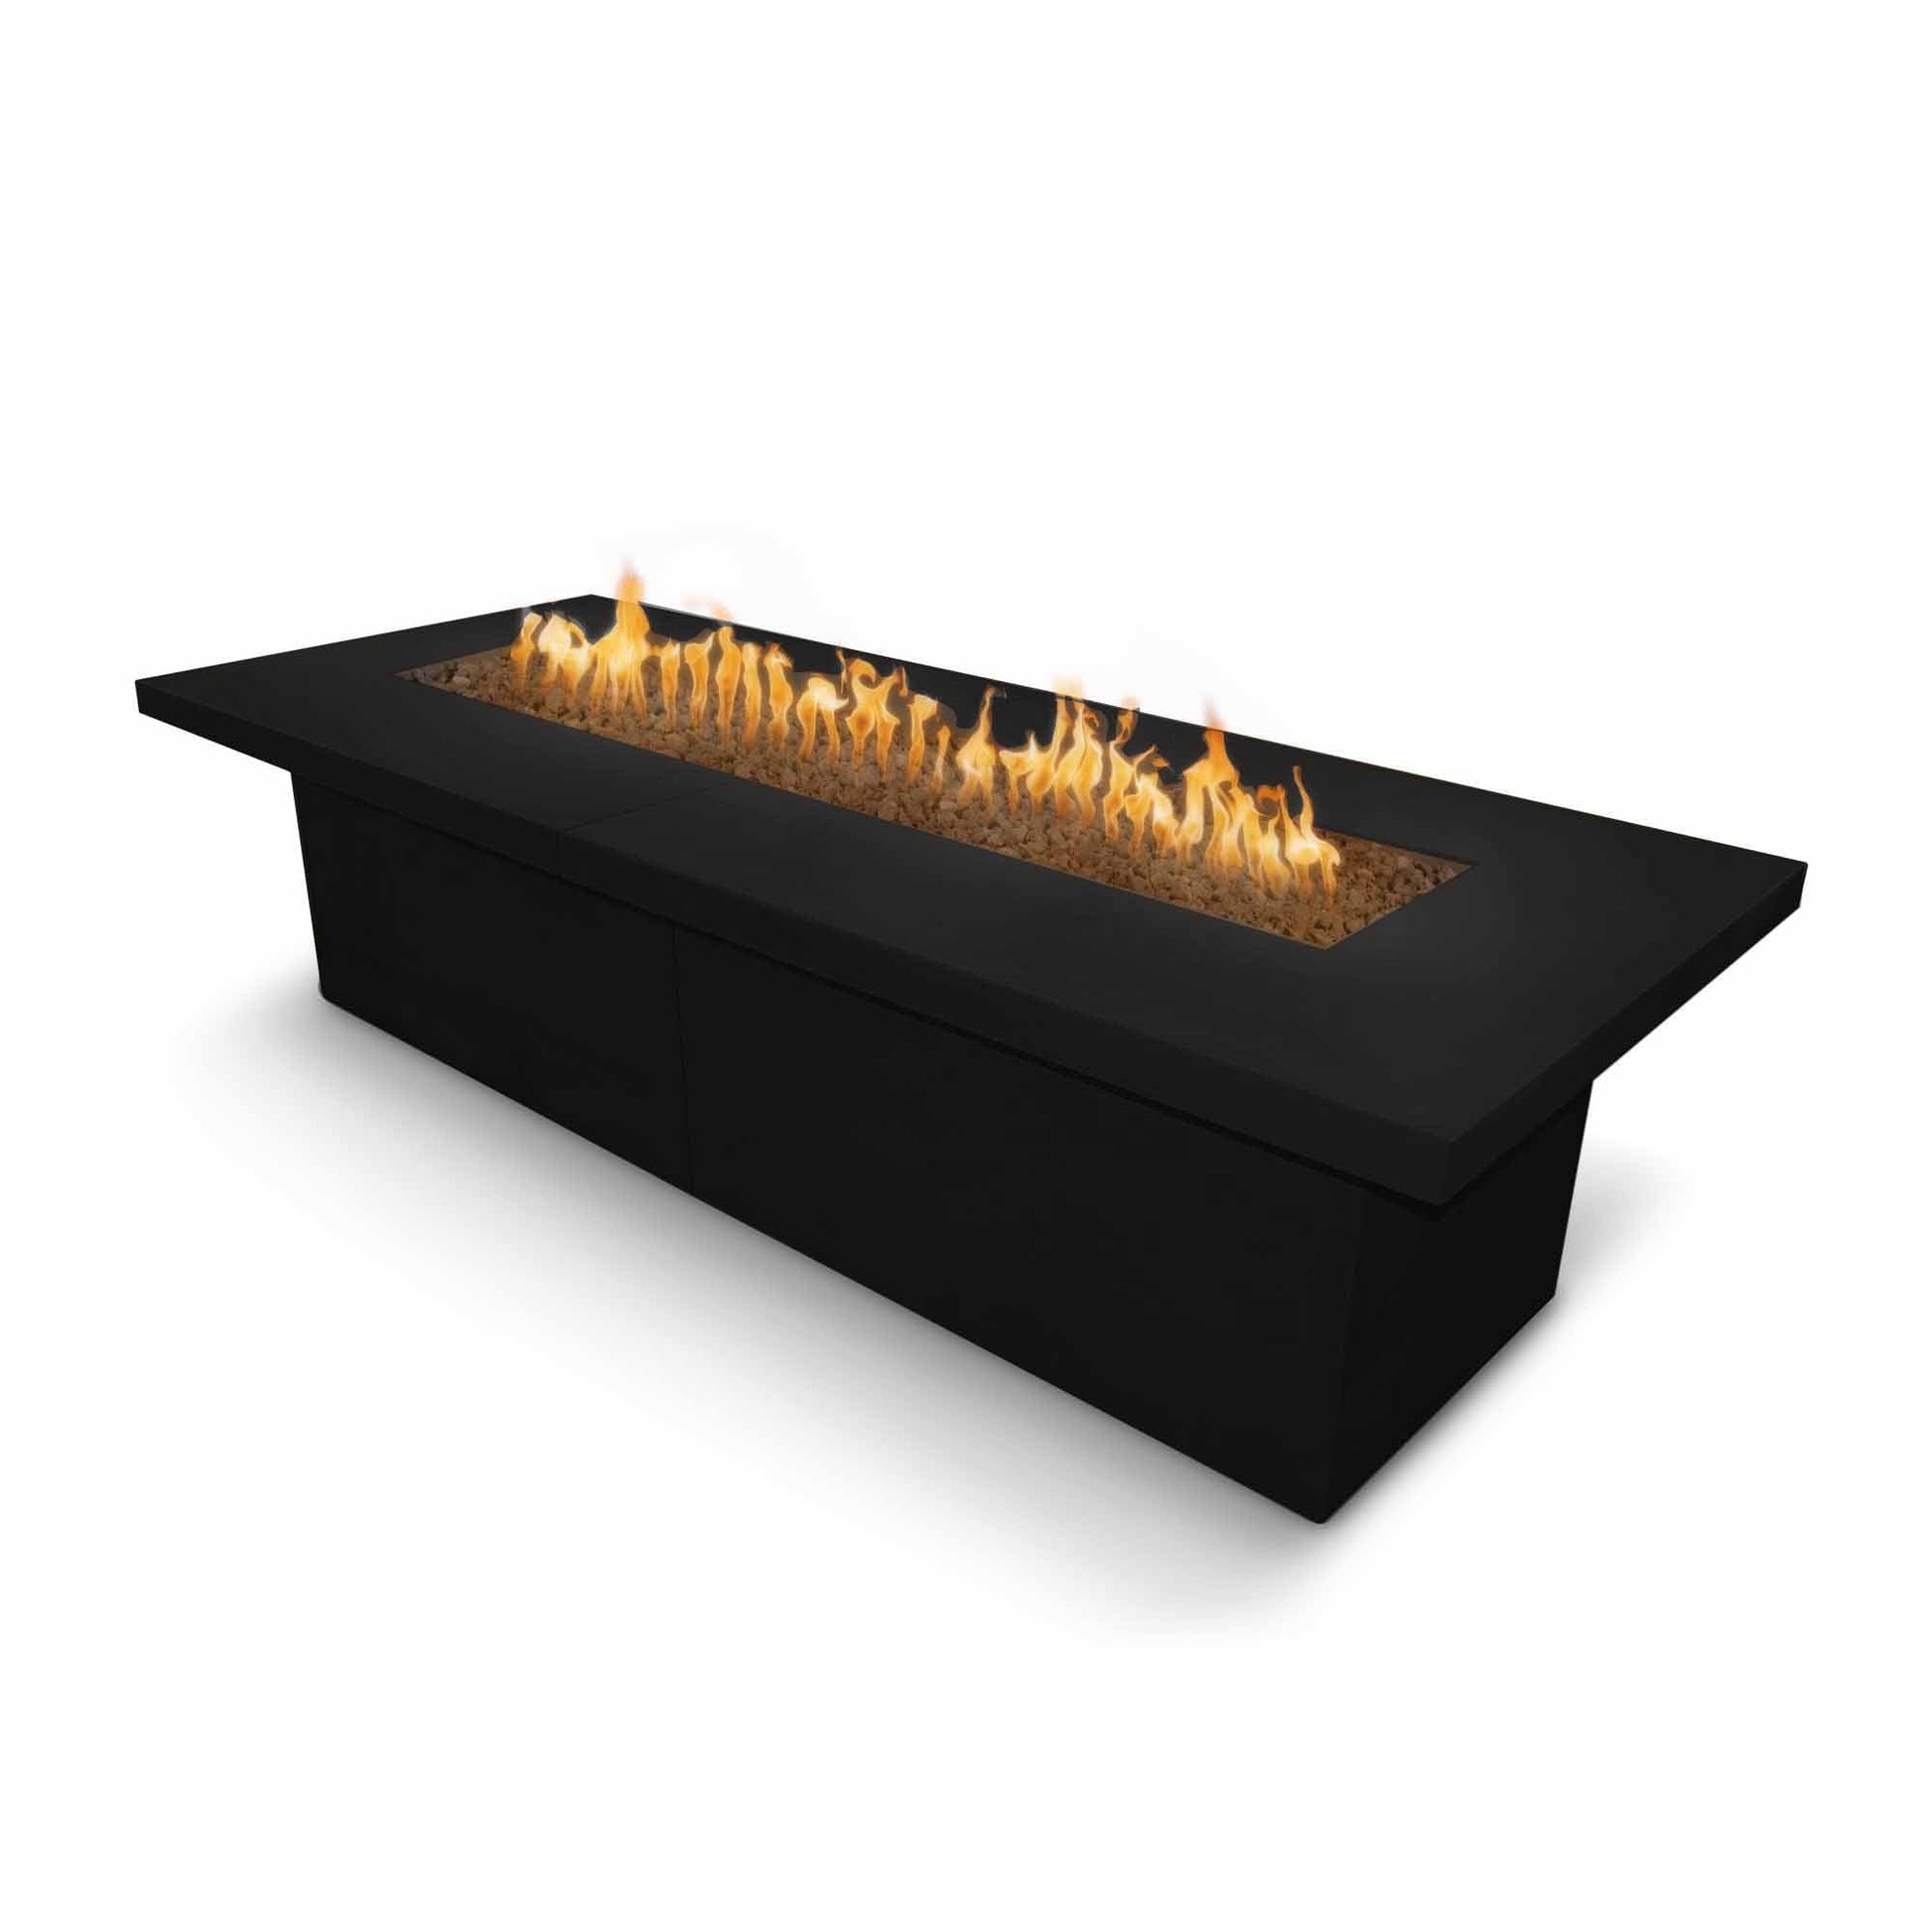 The Outdoor Plus Rectangular Newport 144" Copper Vein Powder Coated Metal Liquid Propane Fire Pit with 12V Electronic Ignition